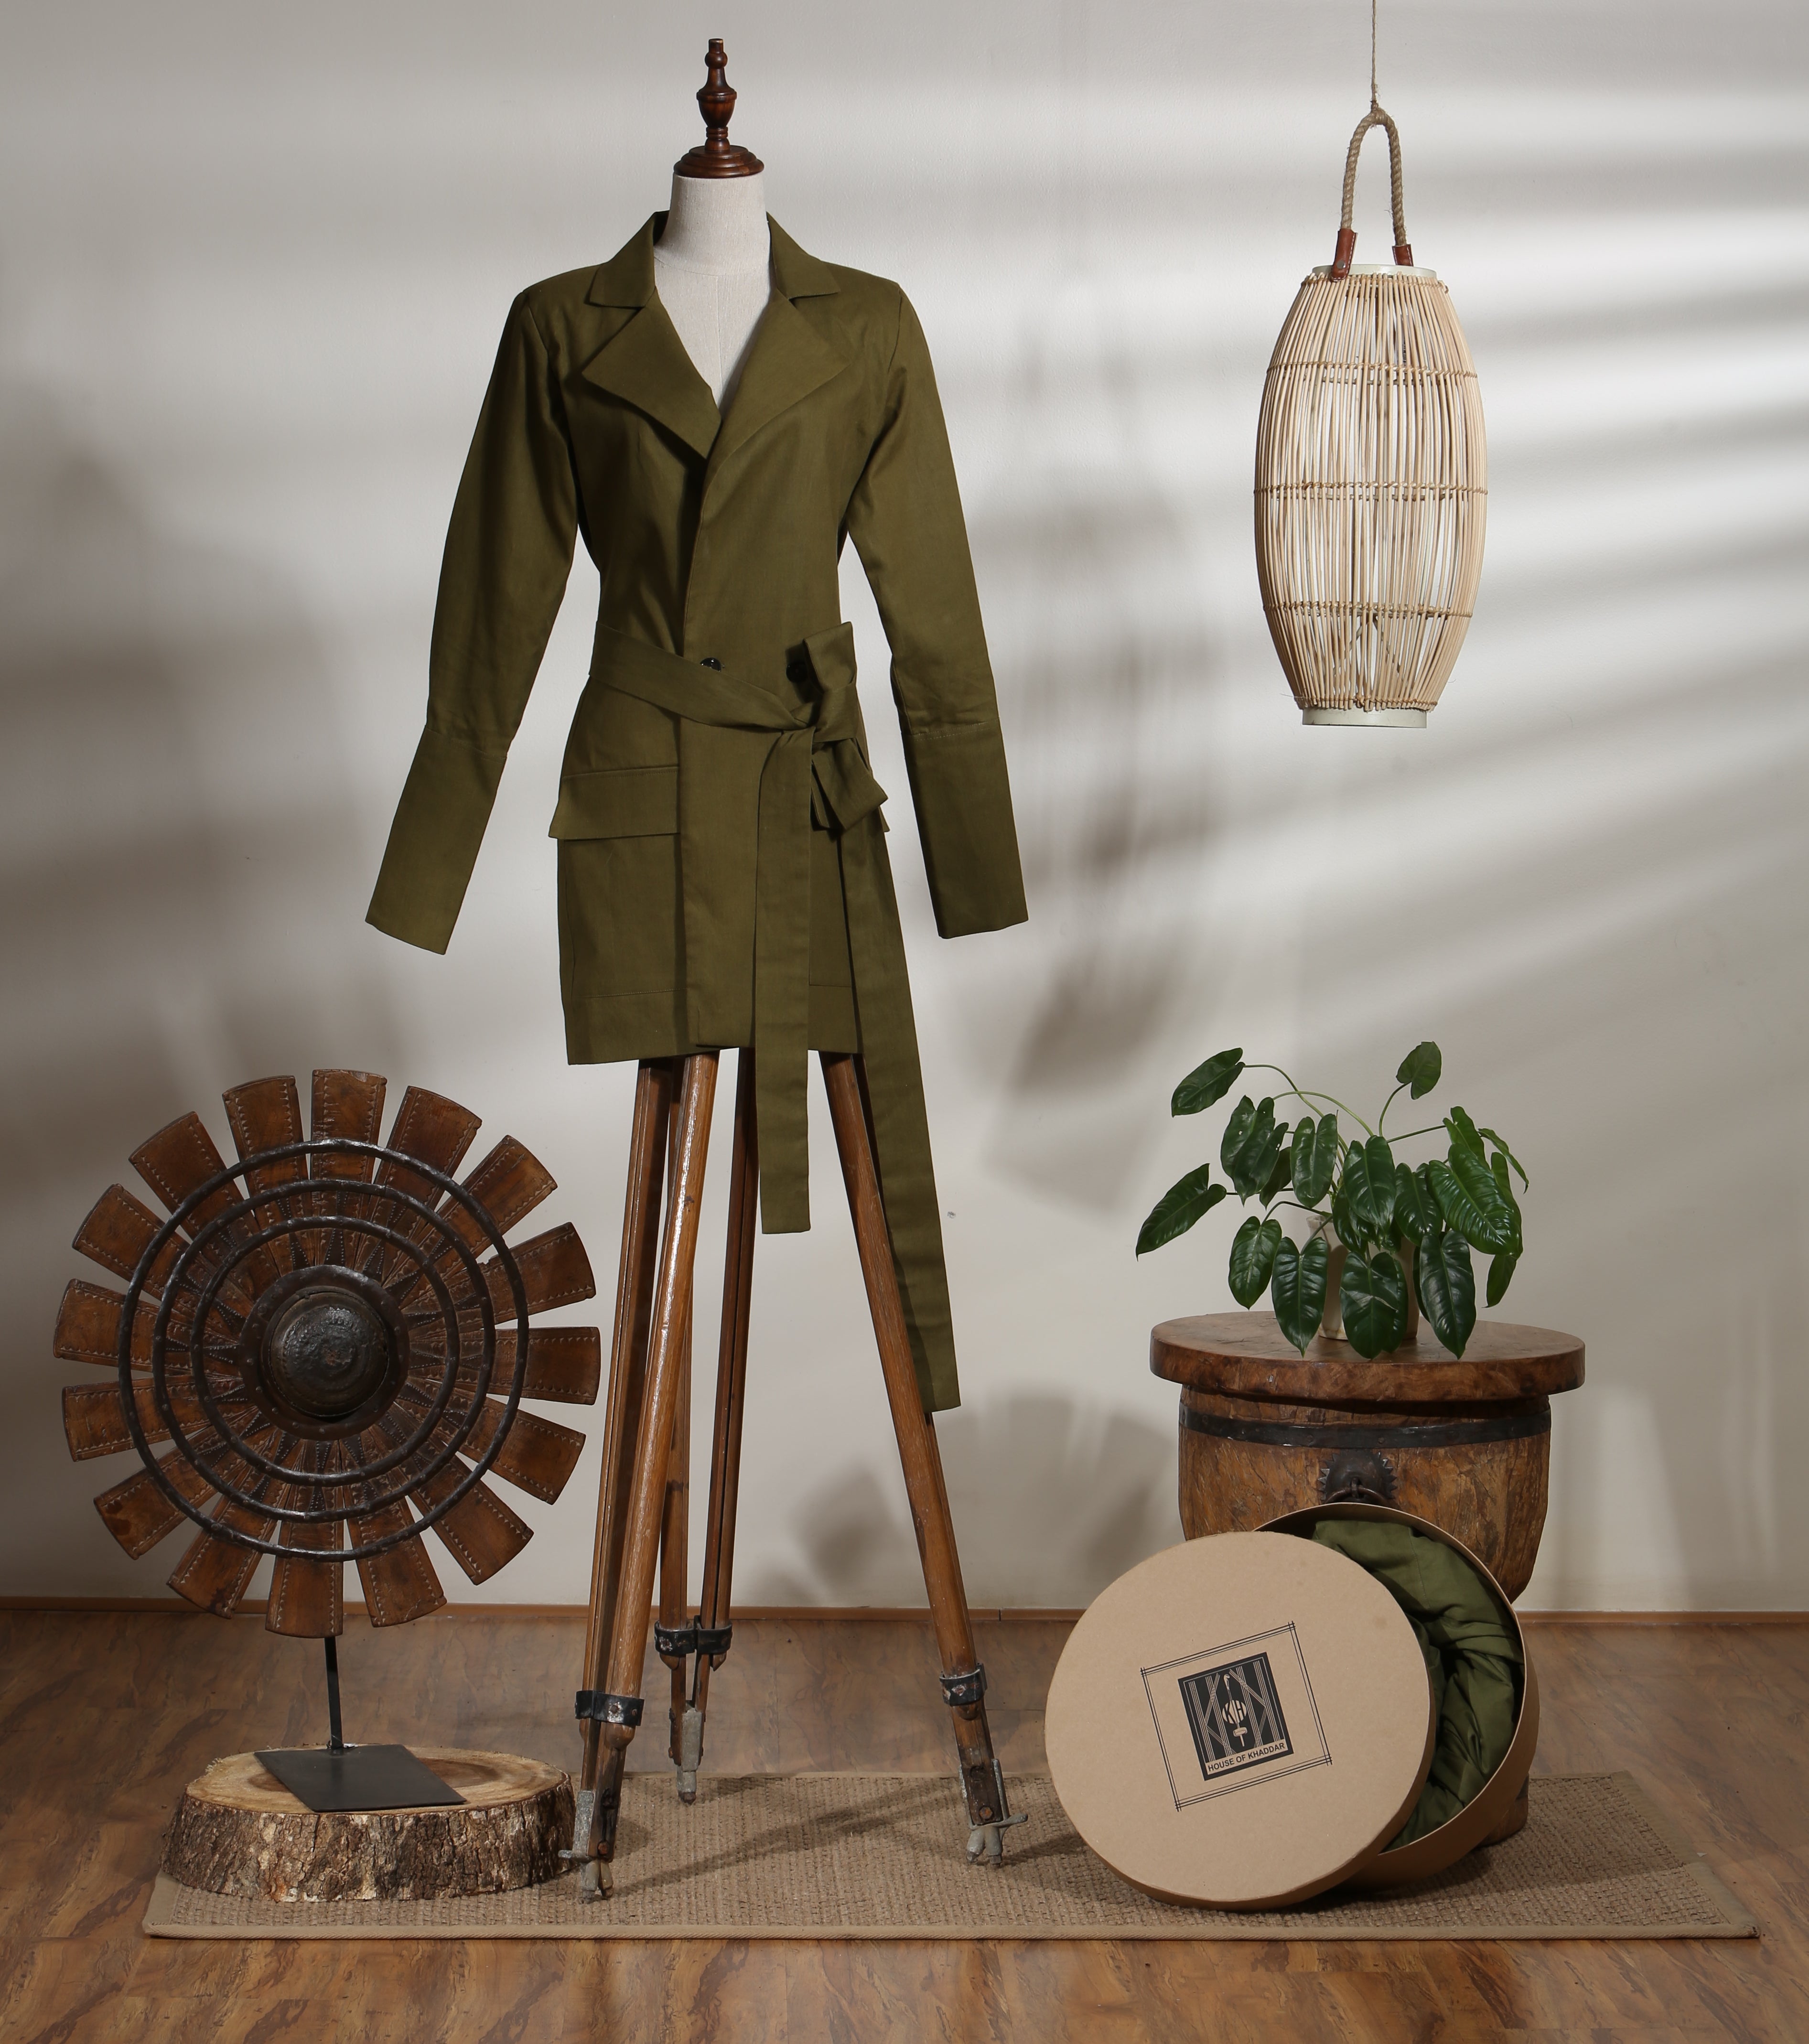 MID LENGTH JACKET WITH PANTS - OLIVE BRANCH